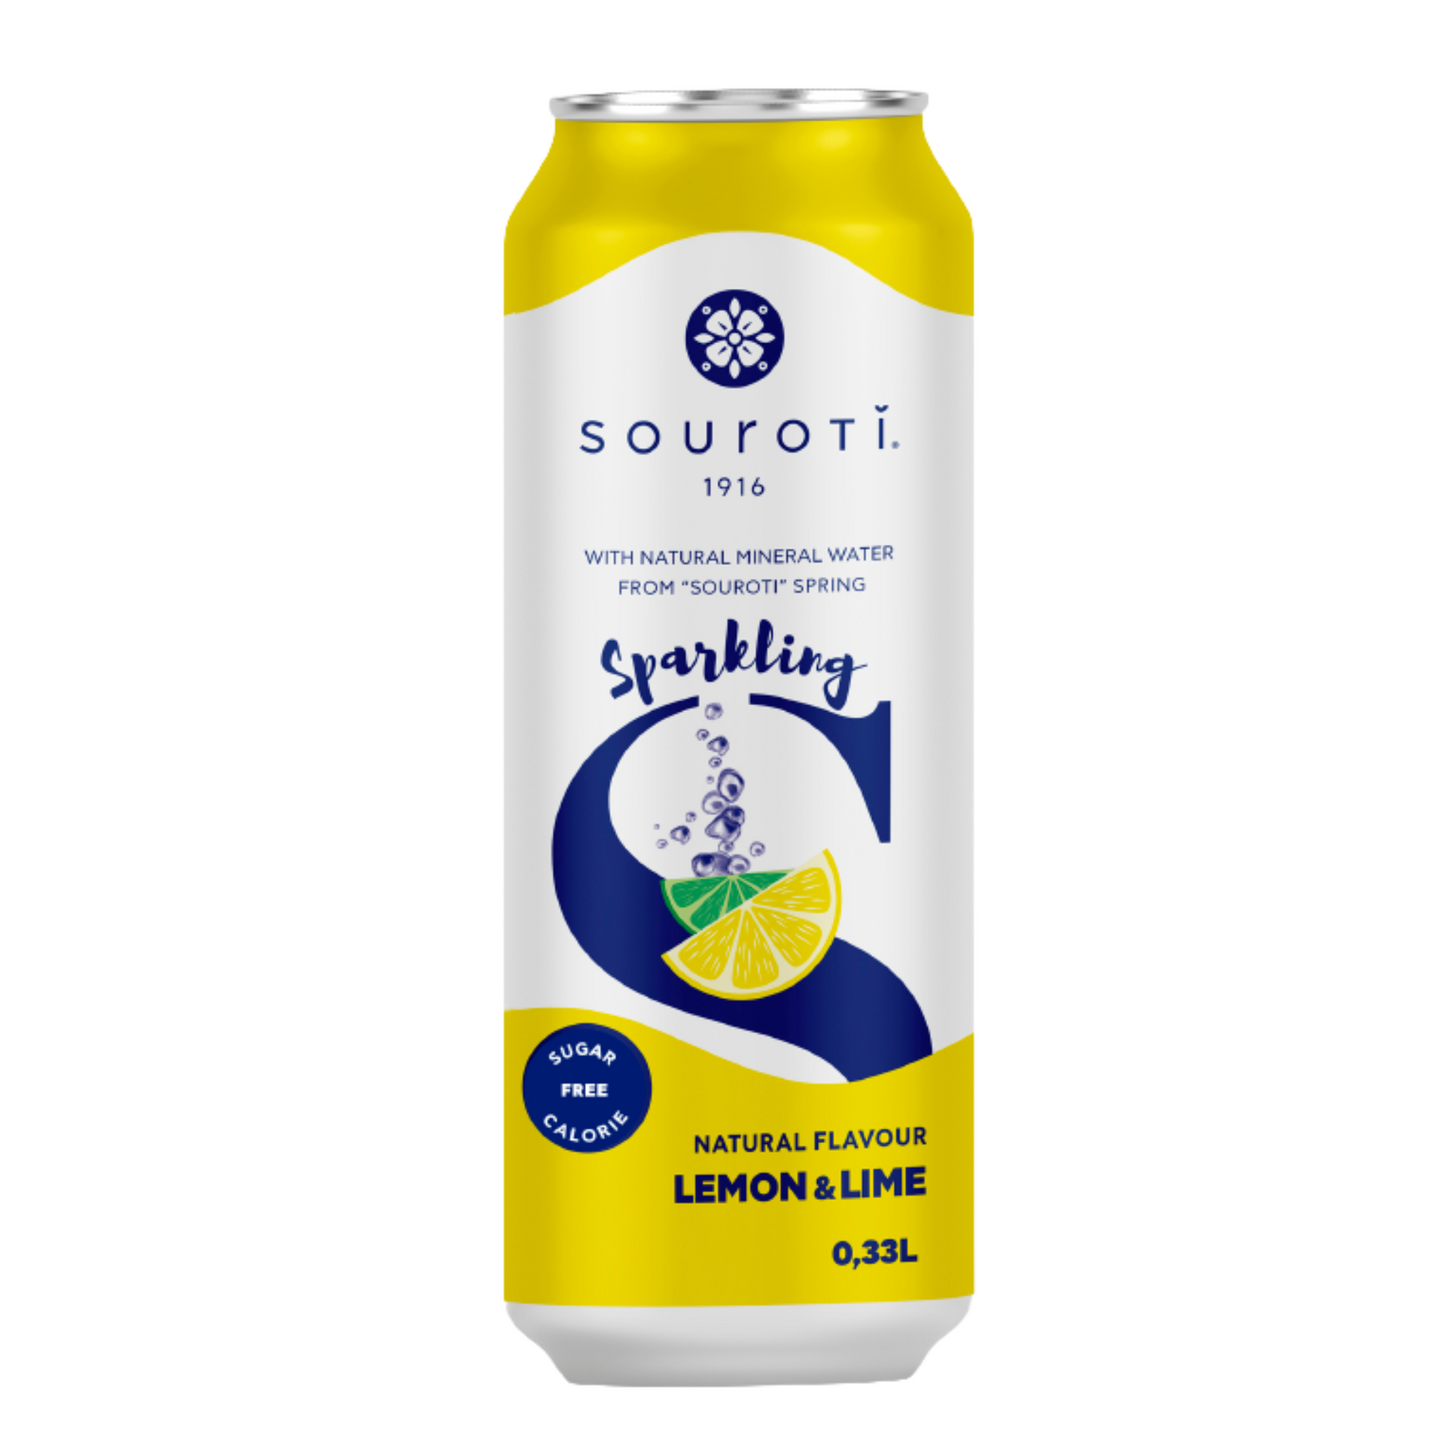 Souroti Lemon & Lime Flavored Carbonated Mineral Water 330ml